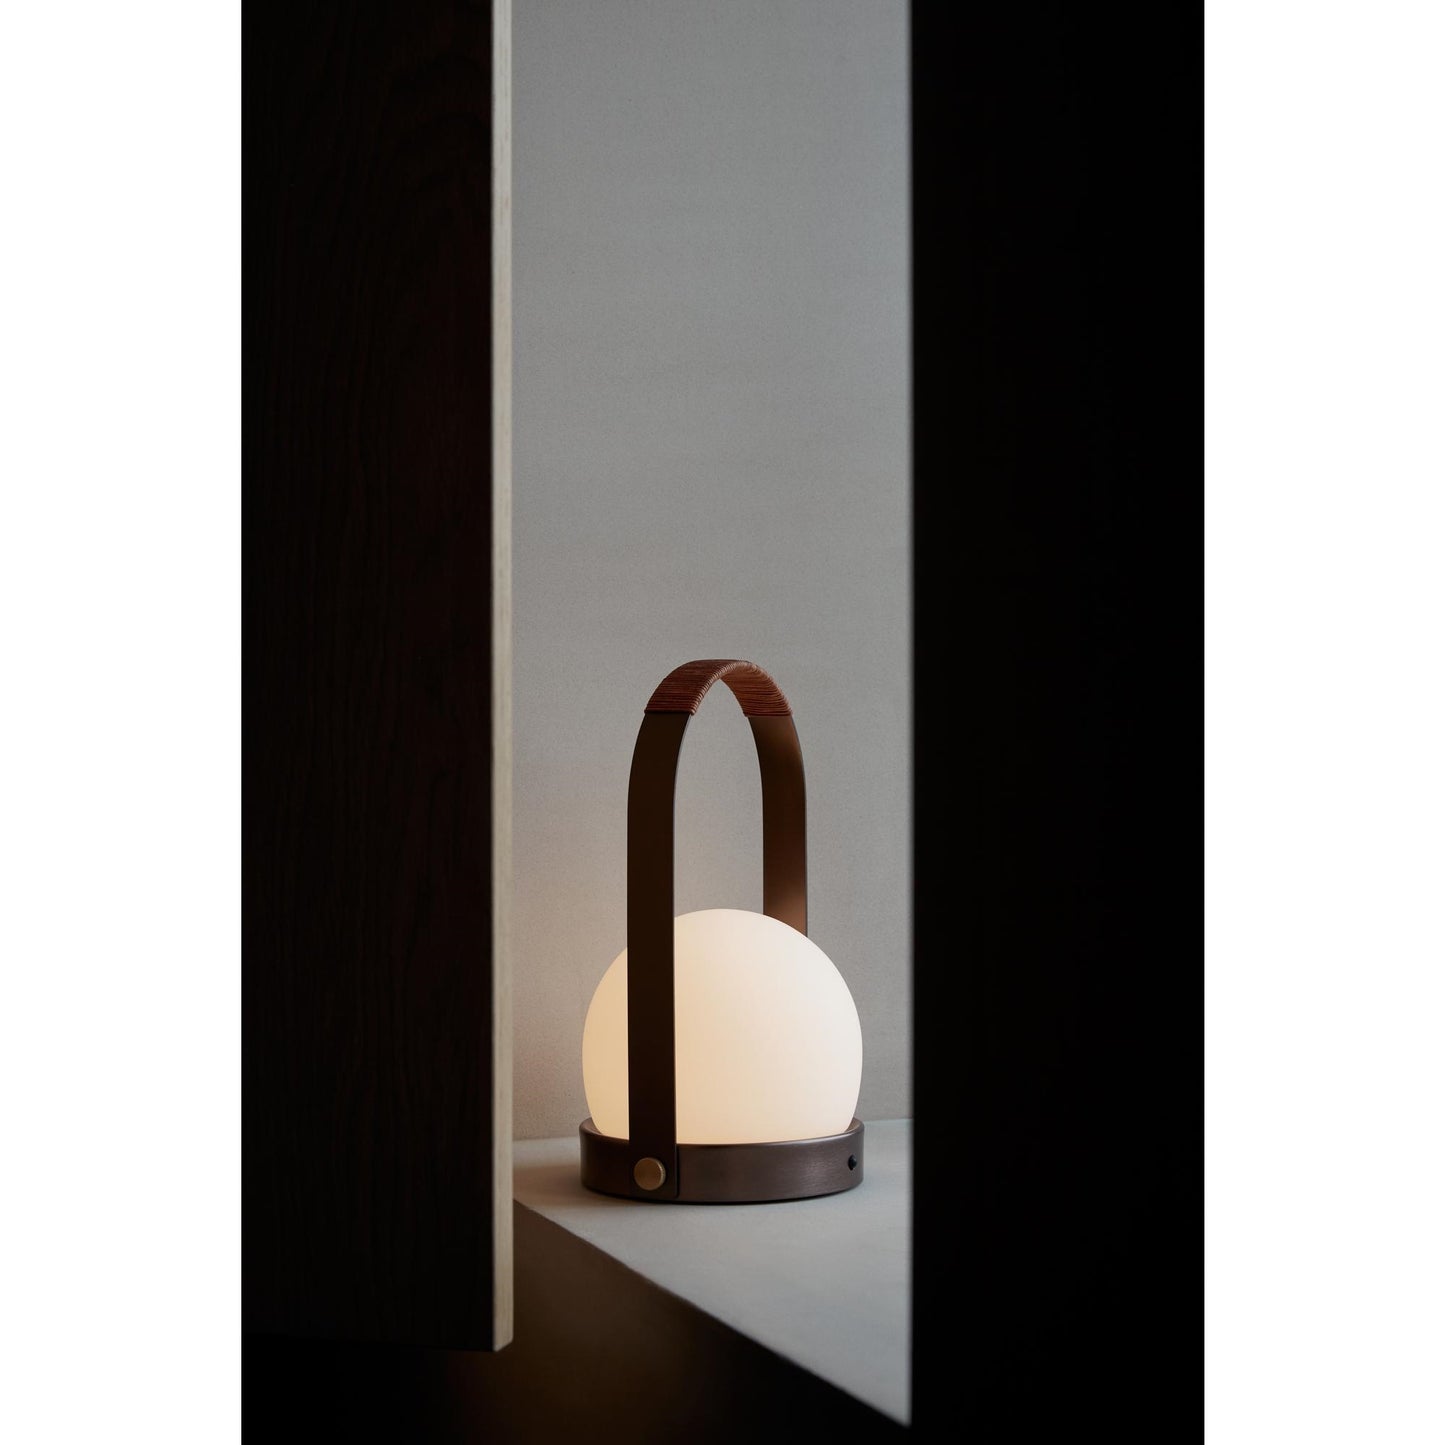 Carrie Table Lamp By Menu